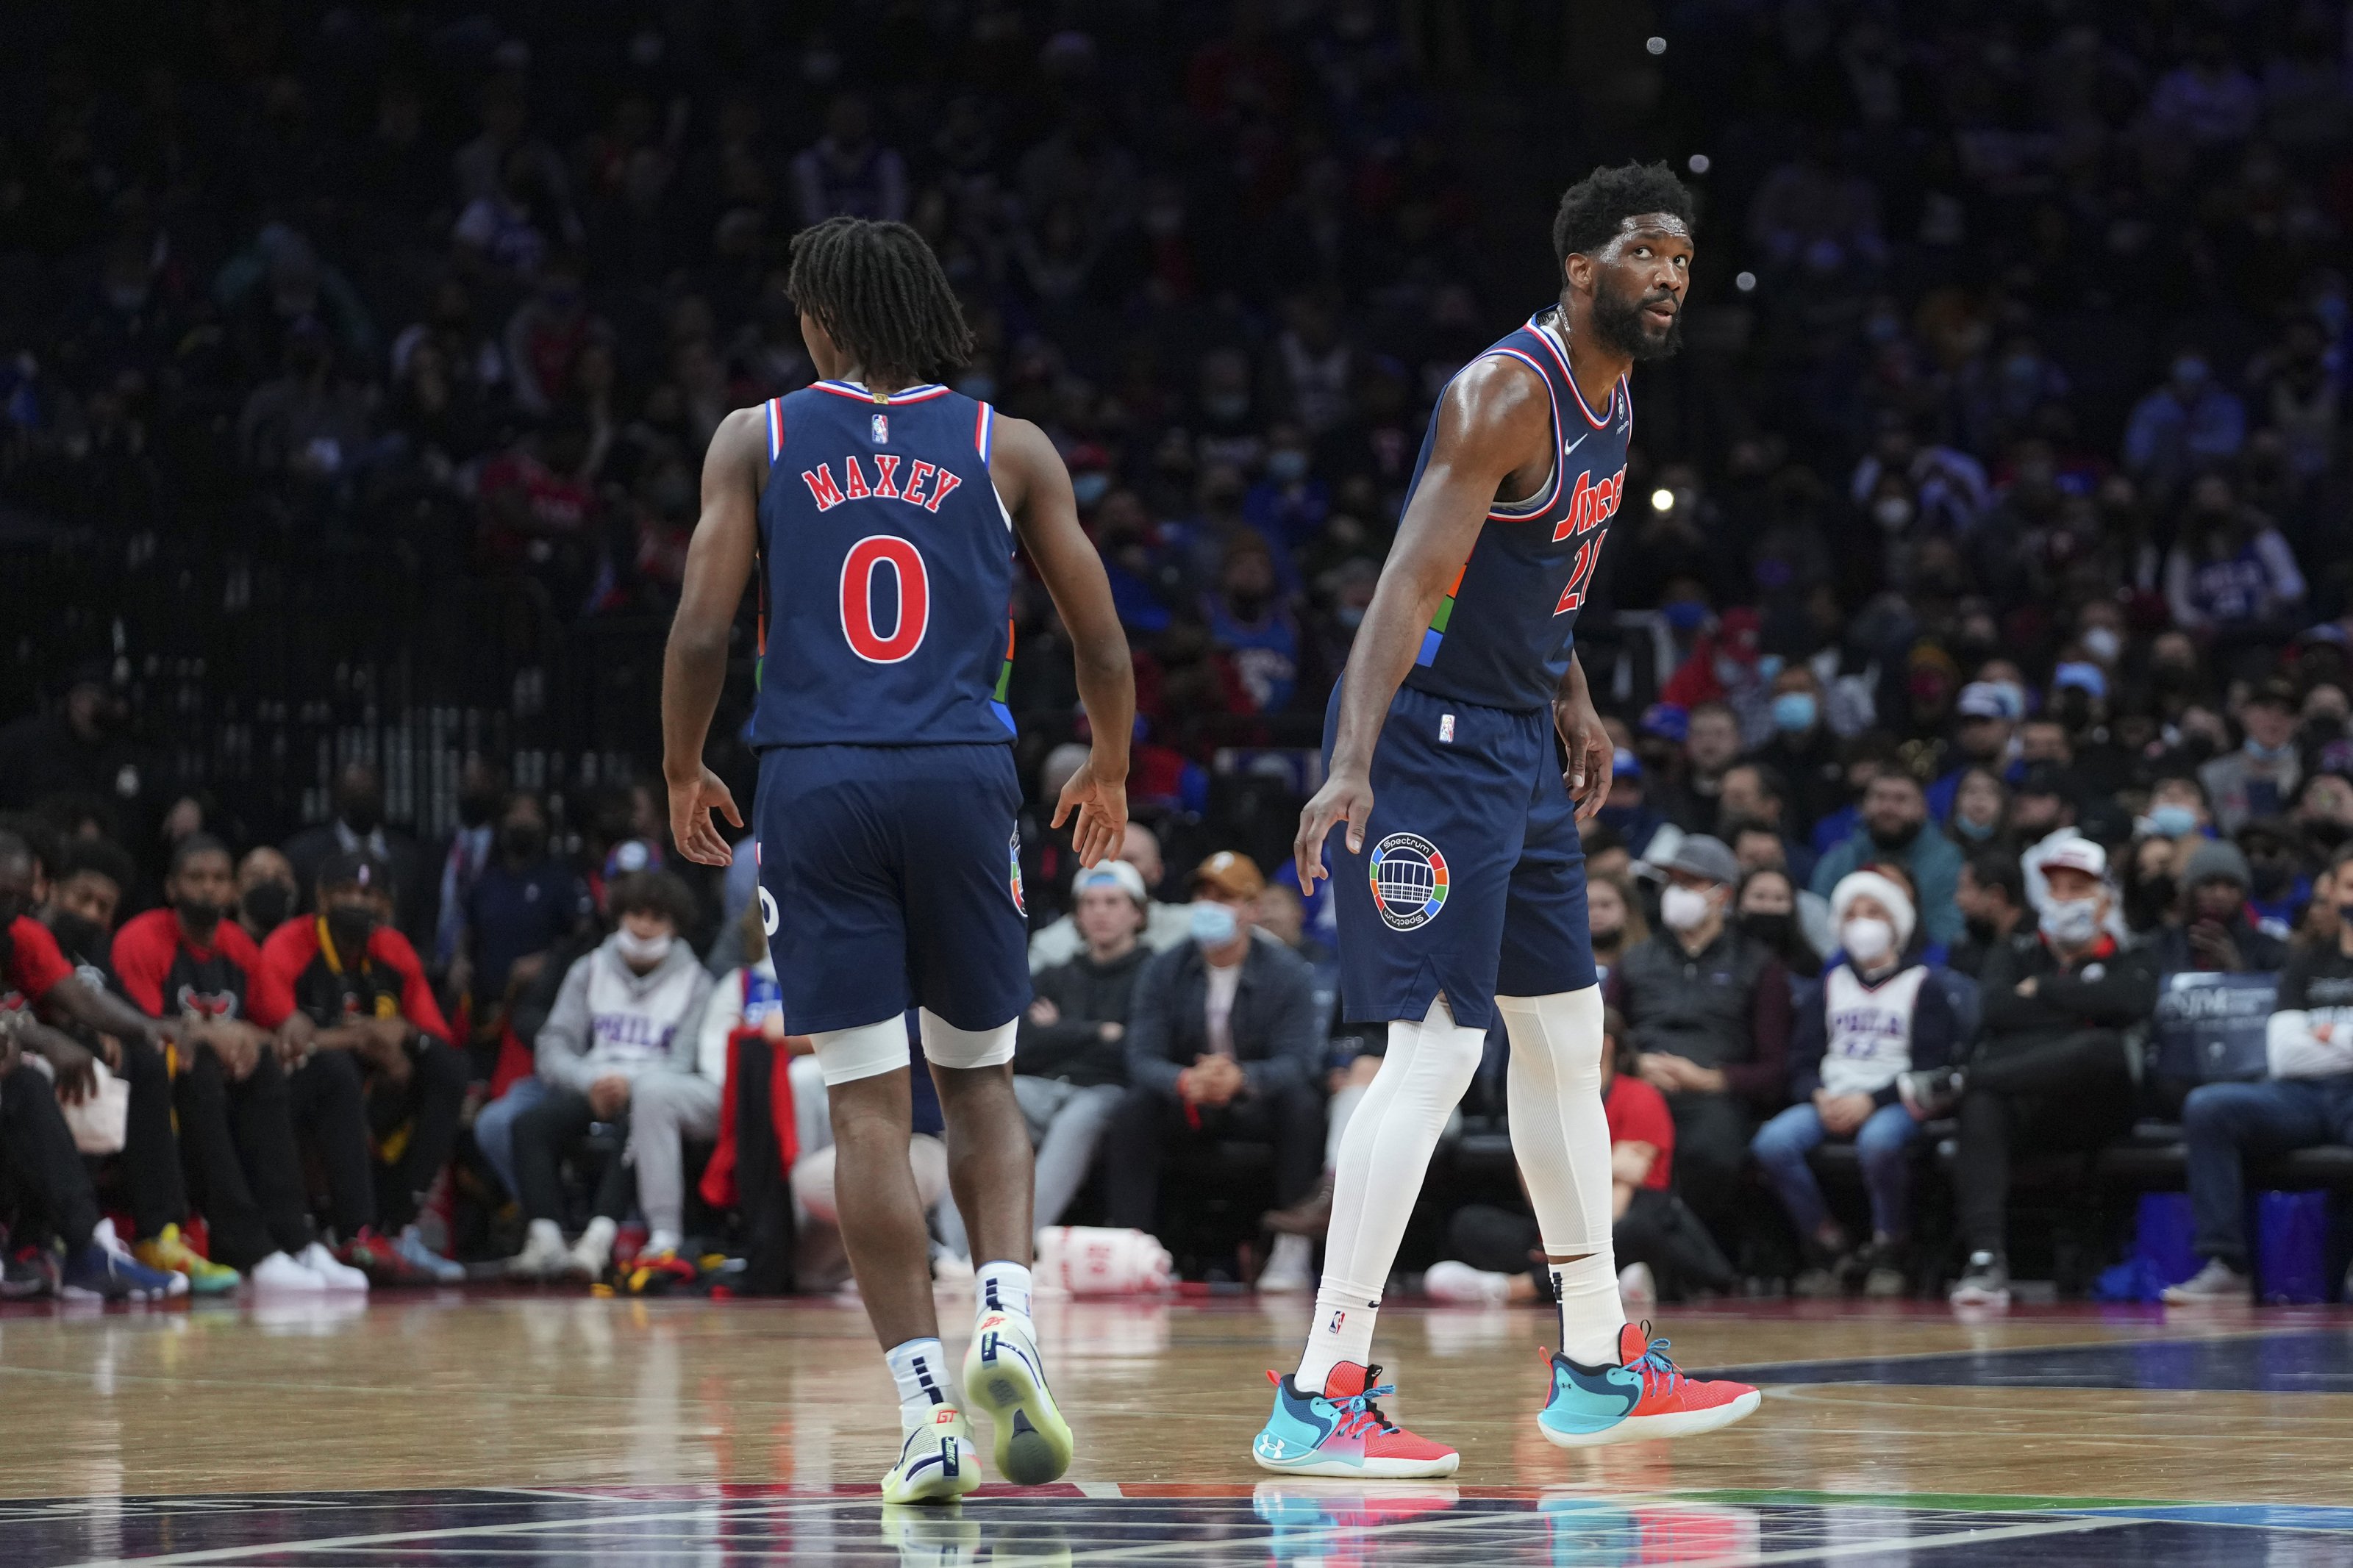 Potential of the Sixers' duo of Joel Embiid and Tyrese Maxey